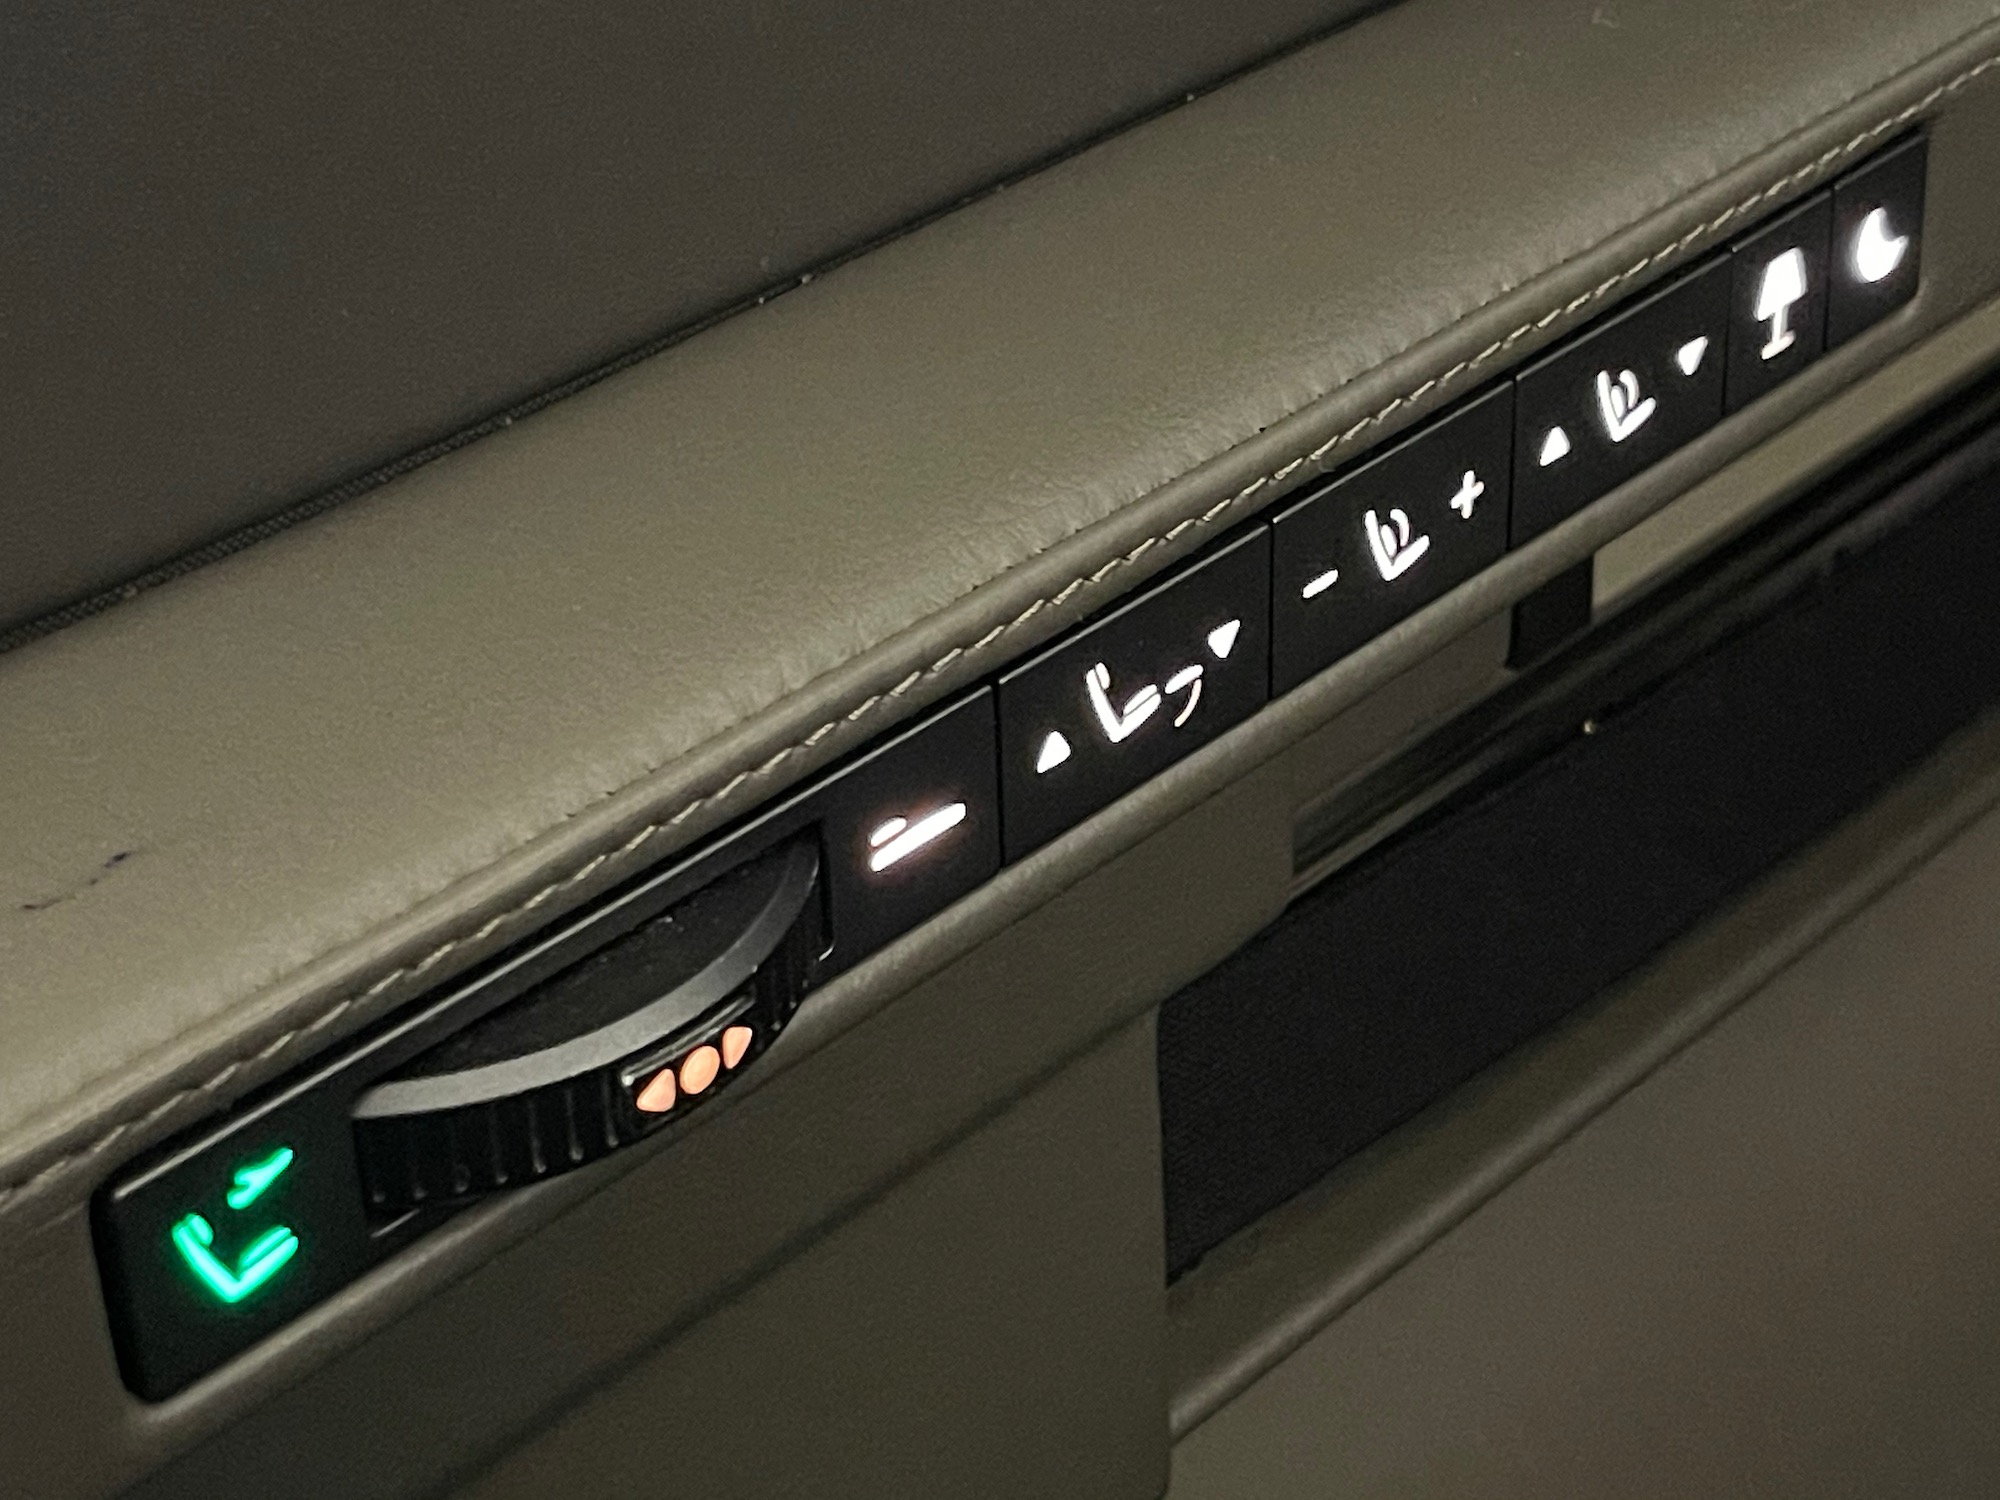 a close up of a seat control panel